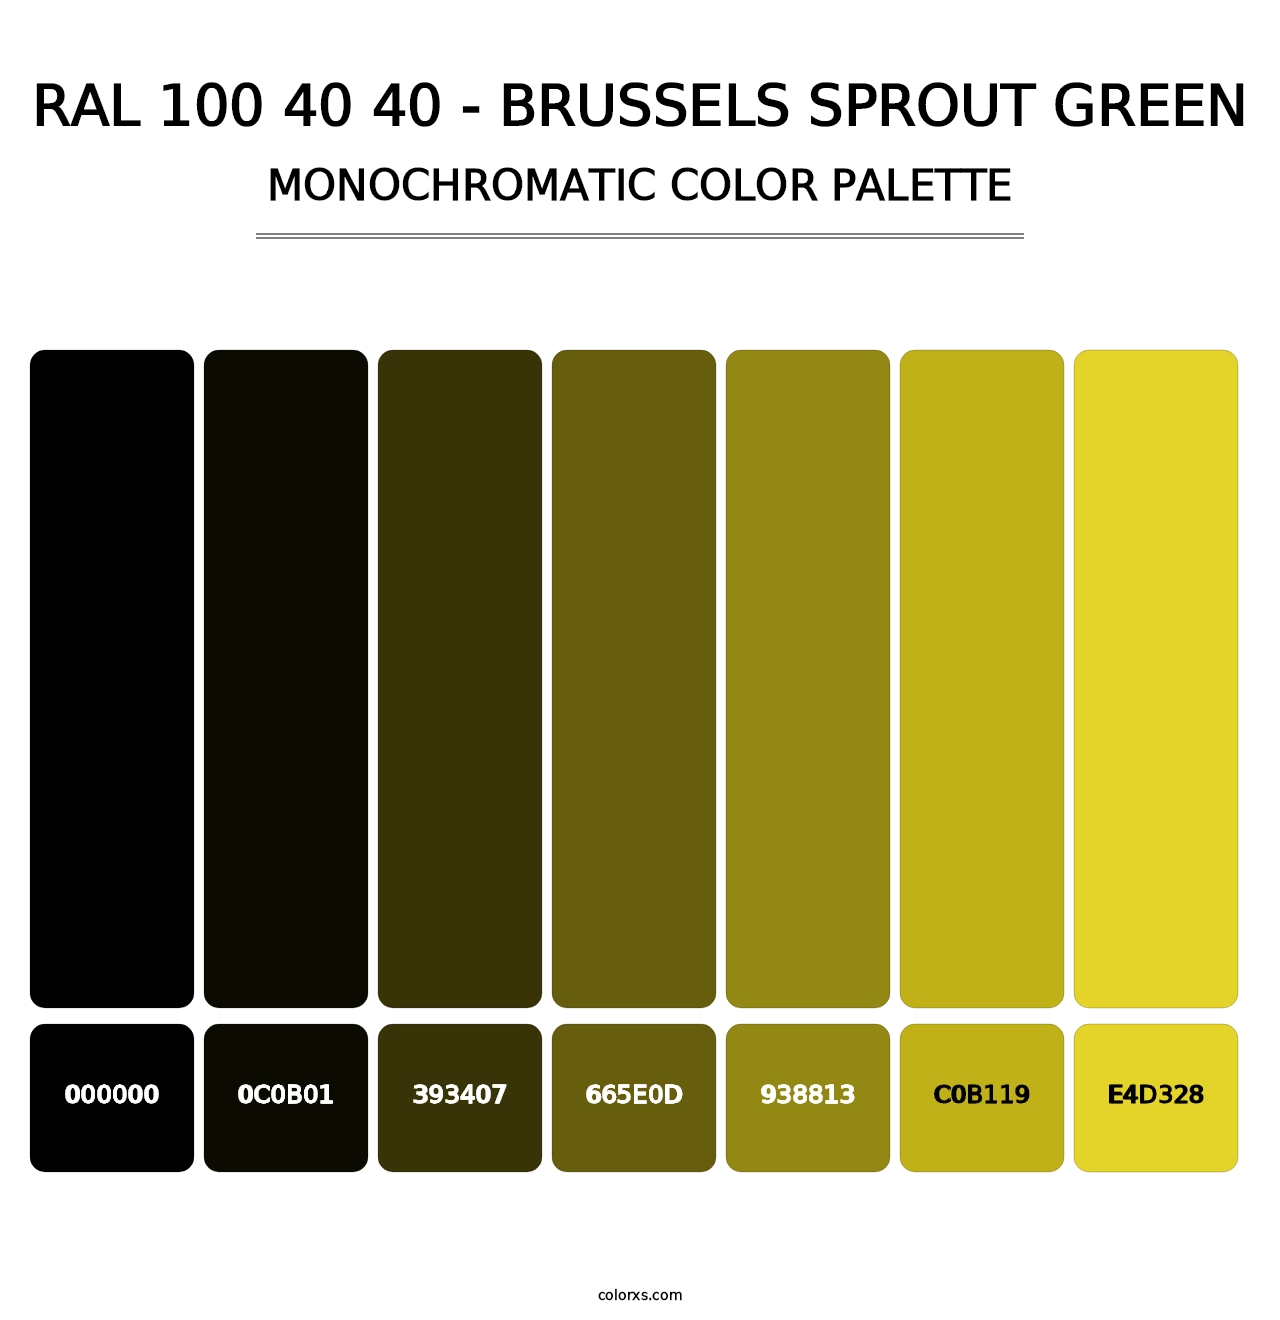 RAL 100 40 40 - Brussels Sprout Green - Monochromatic Color Palette